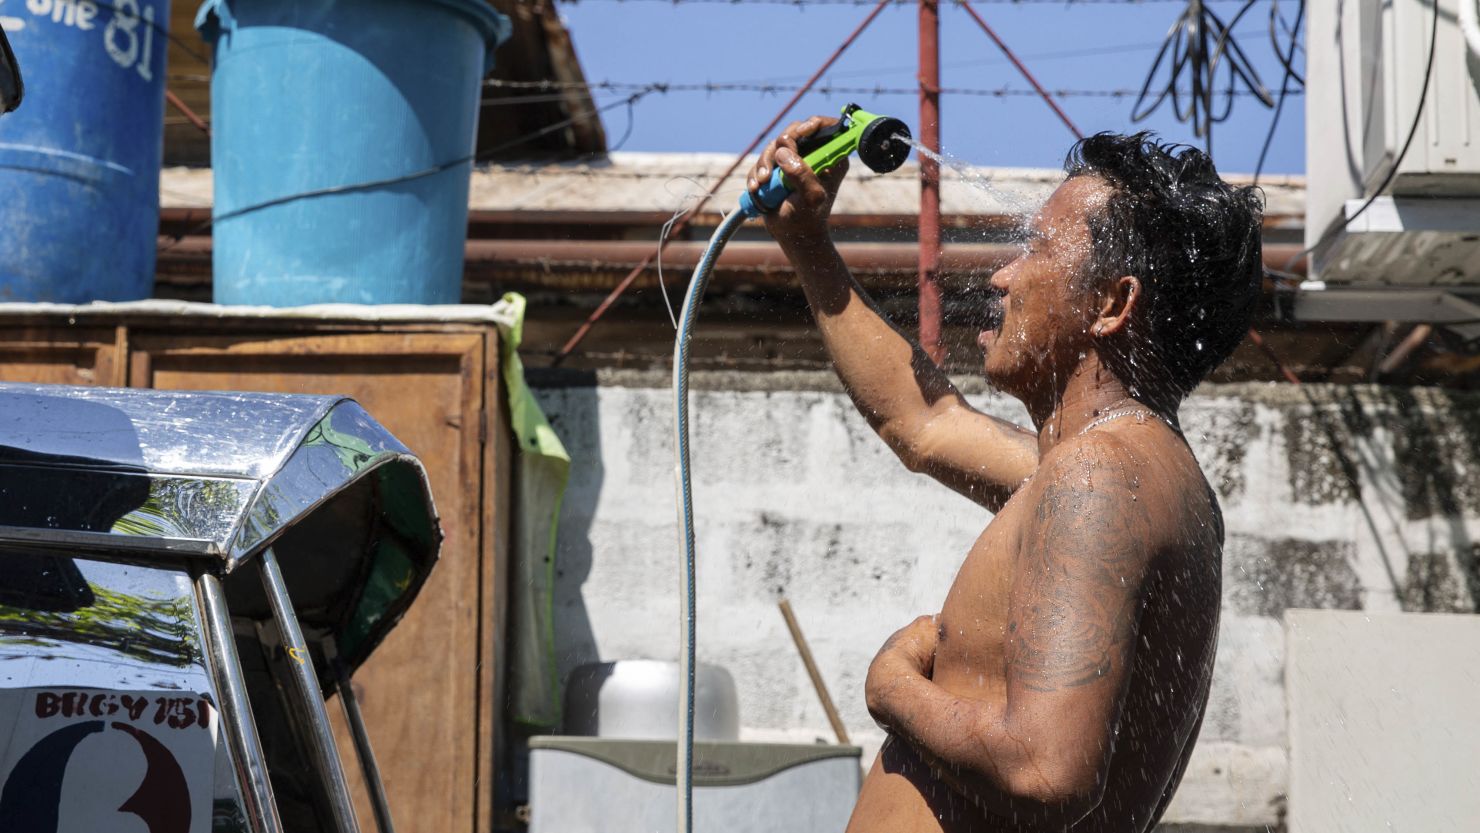 A man showers with a hose during hot weather in Manila, the Philippines on April 28, 2024.